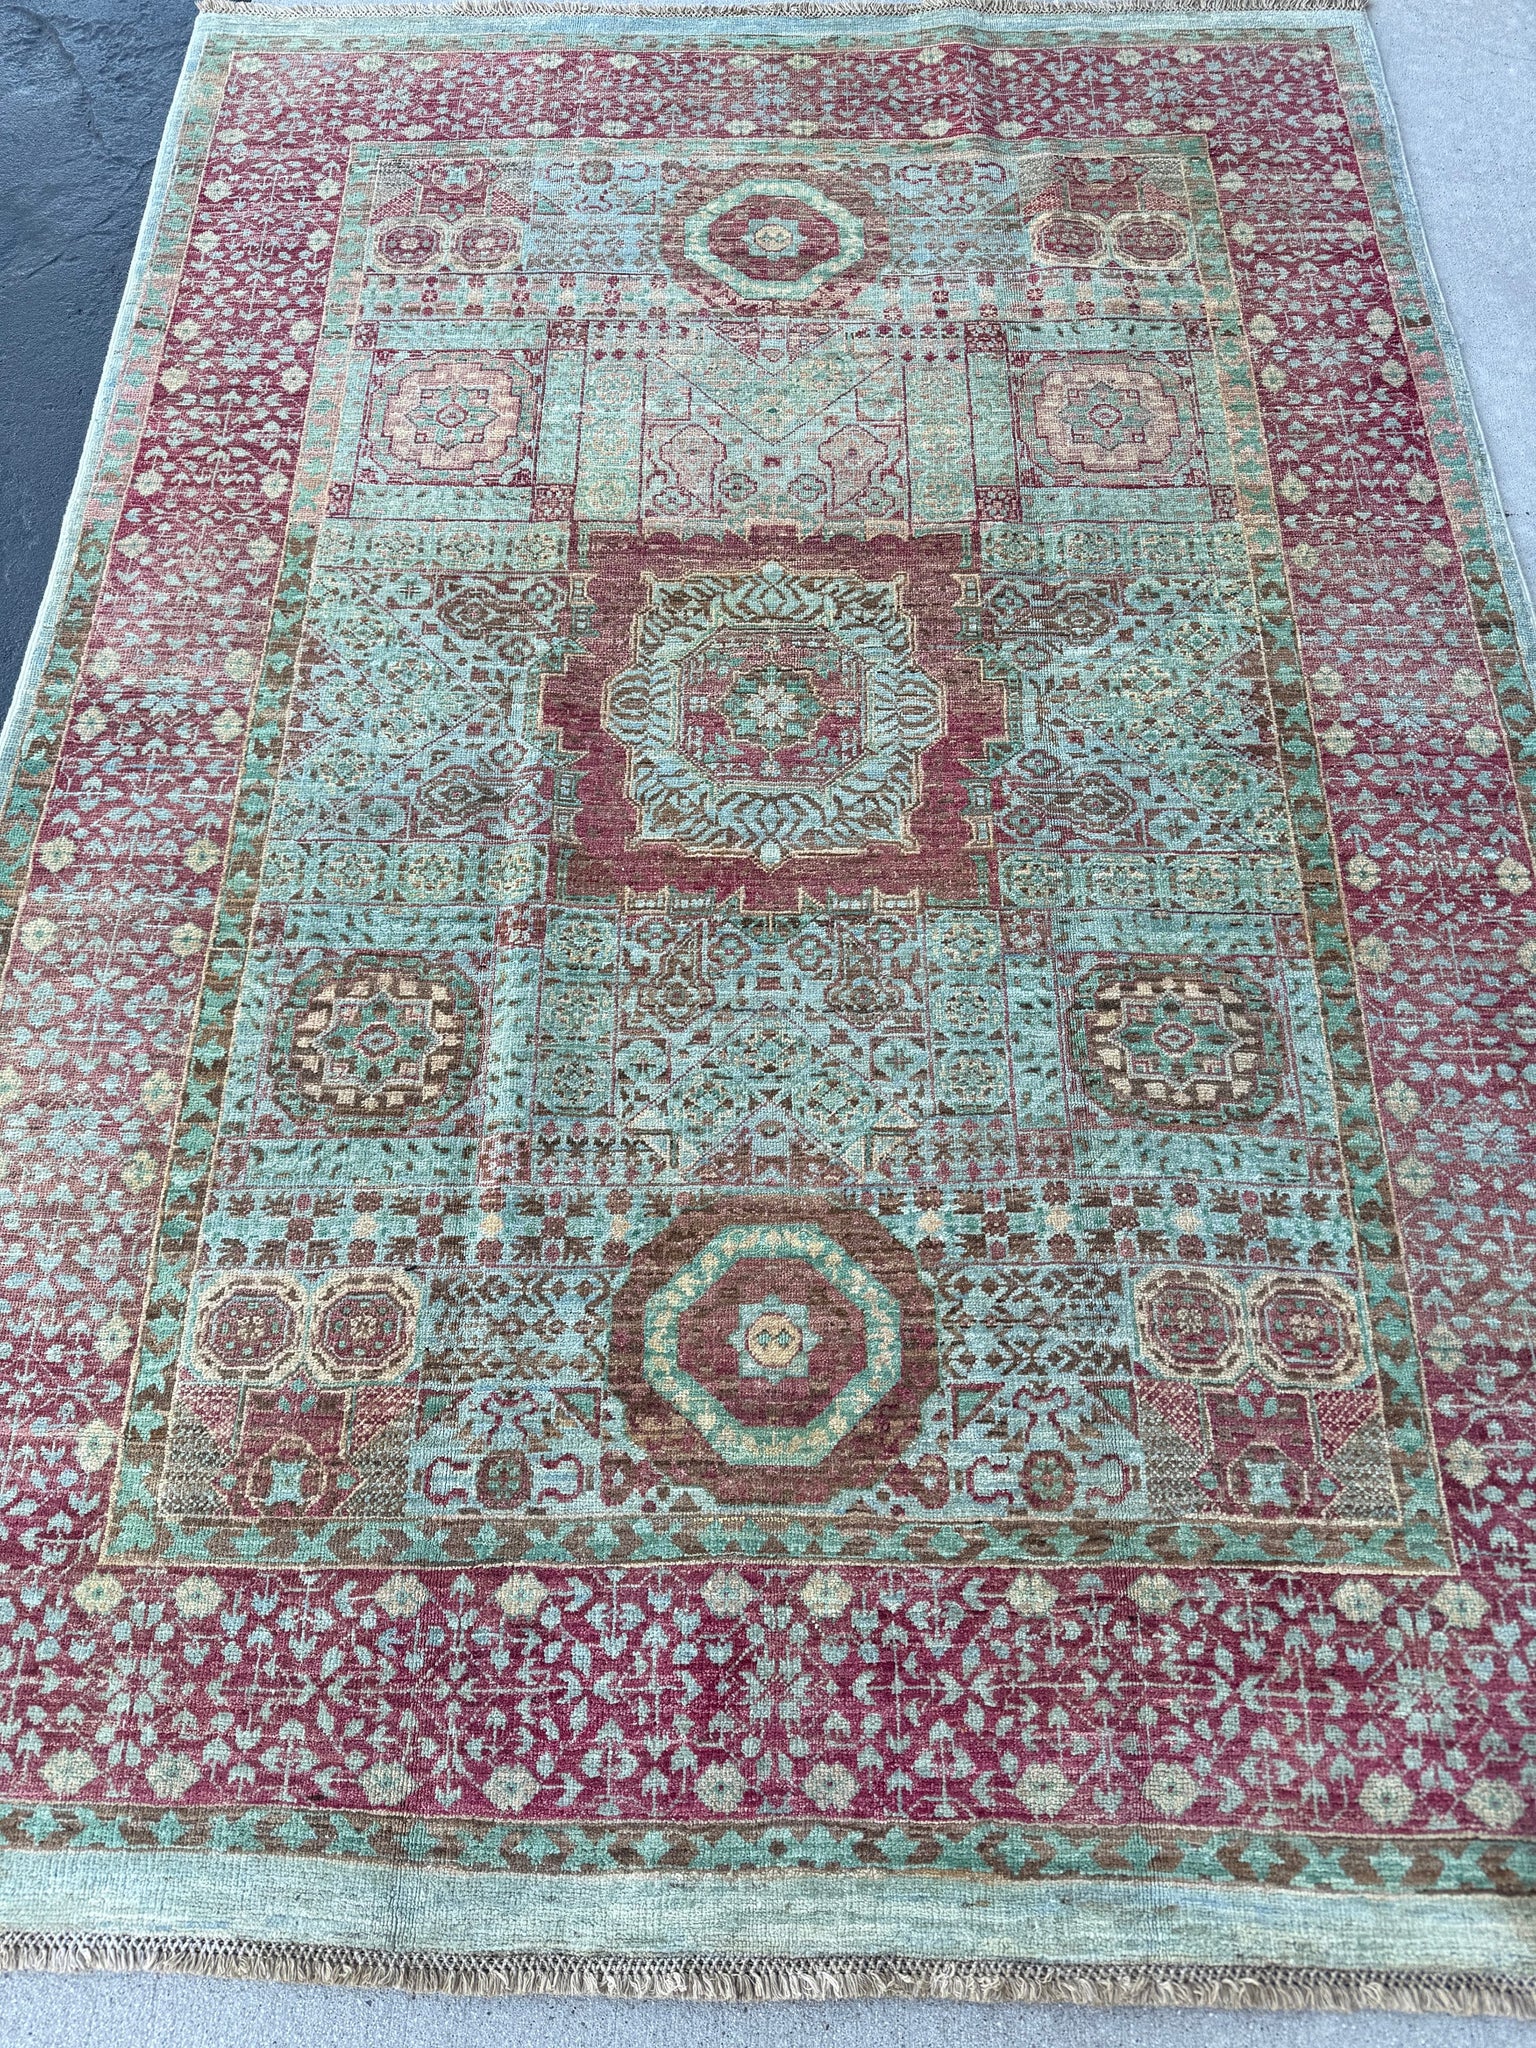 4x6 (120x180) Handmade Afghan Rug | Watermelon Red Coral Emerald Pistachio Sea-grass Cream | Wool Persian Knotted Mamluk Traditional